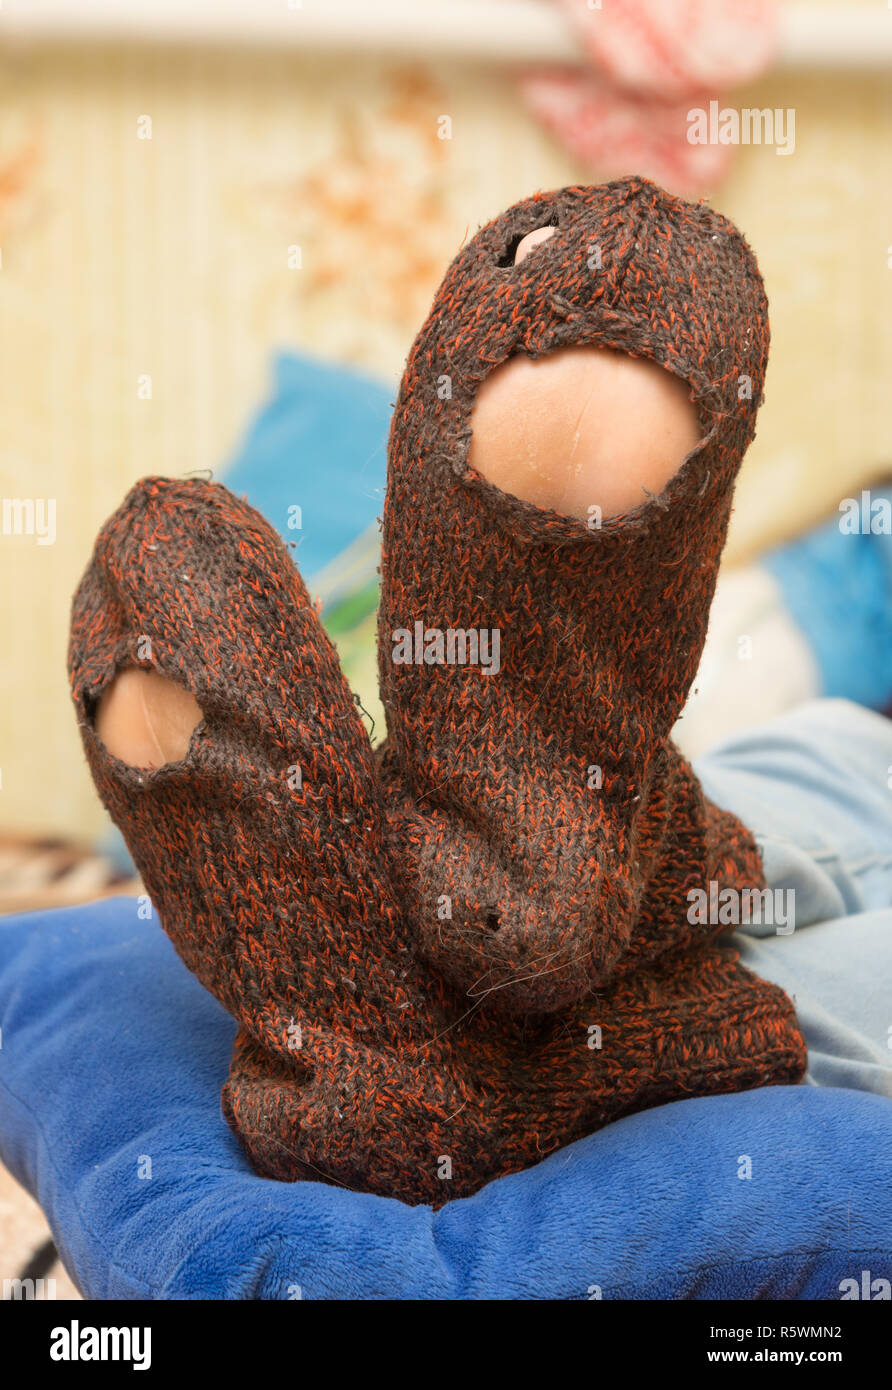 Woolen socks with huge holes on the legs of a man Stock Photo